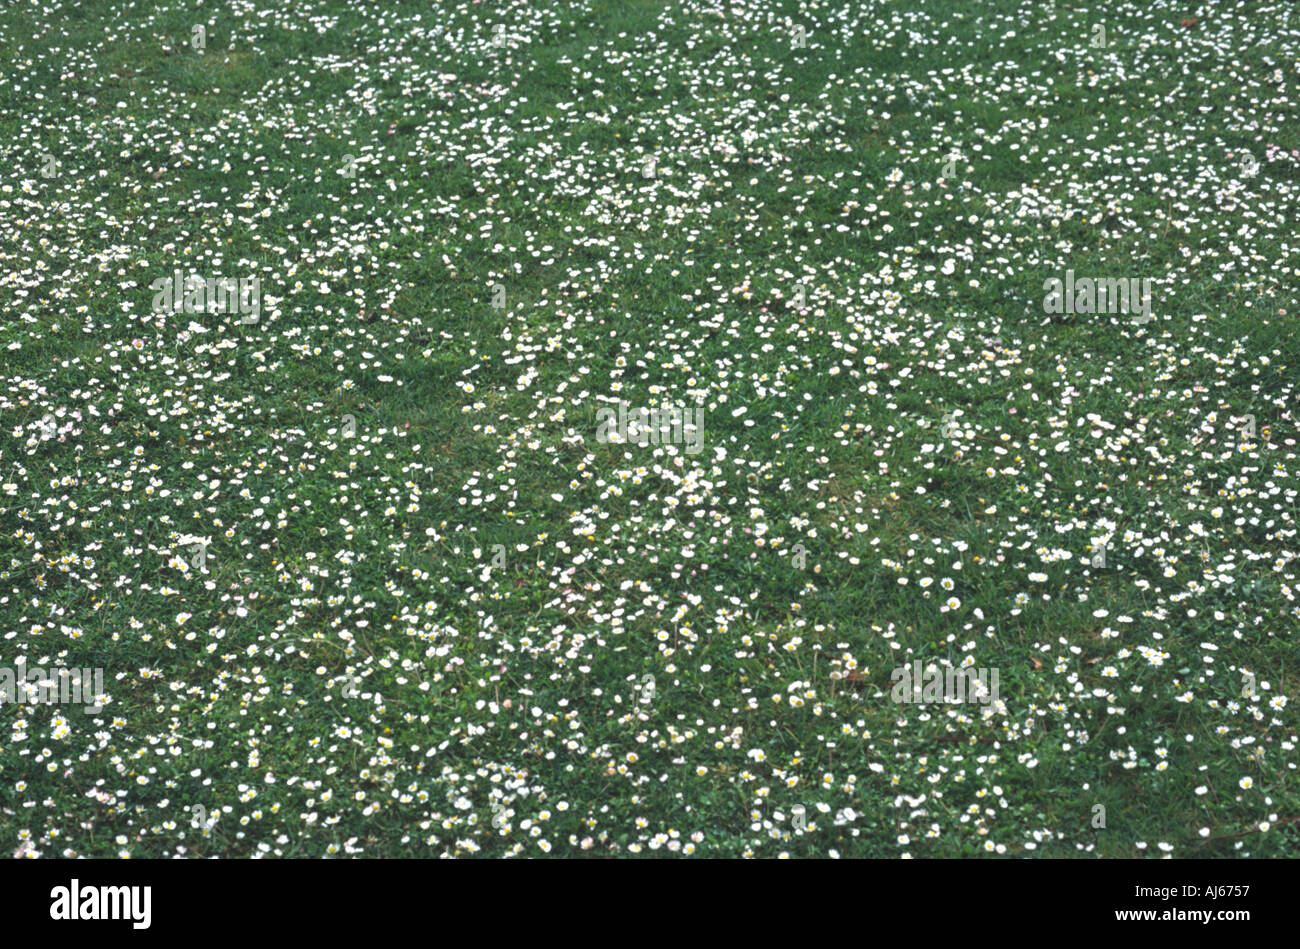 Grass Covered With Daisies England UK Stock Photo